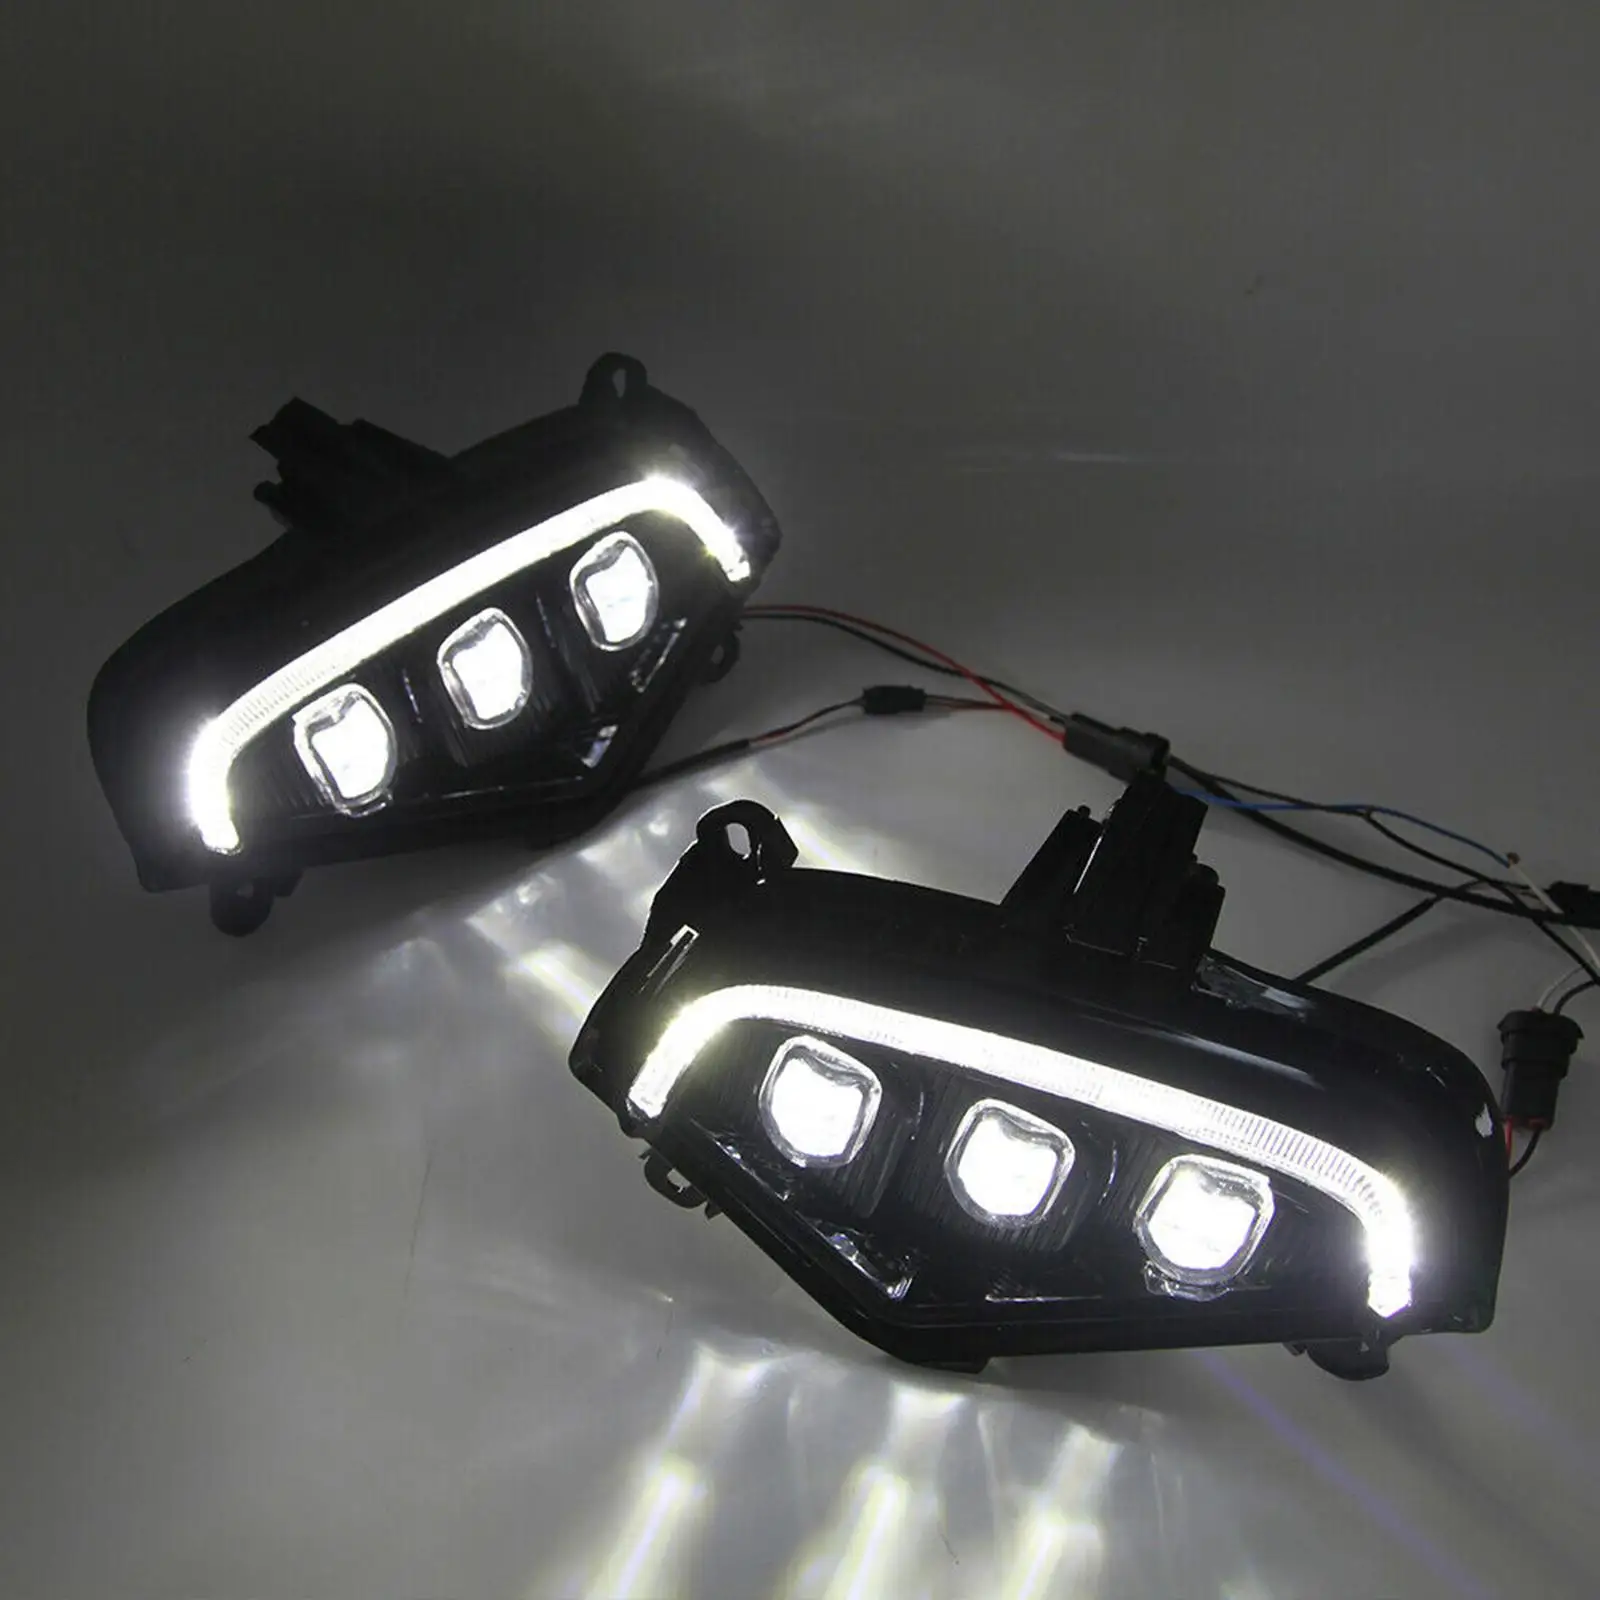 

2 Pieces LED Drl Daytime Running Light Fog Lamps W/ Turn Signal Lamps Fit for Spare Parts Replace ACC Easy to Install